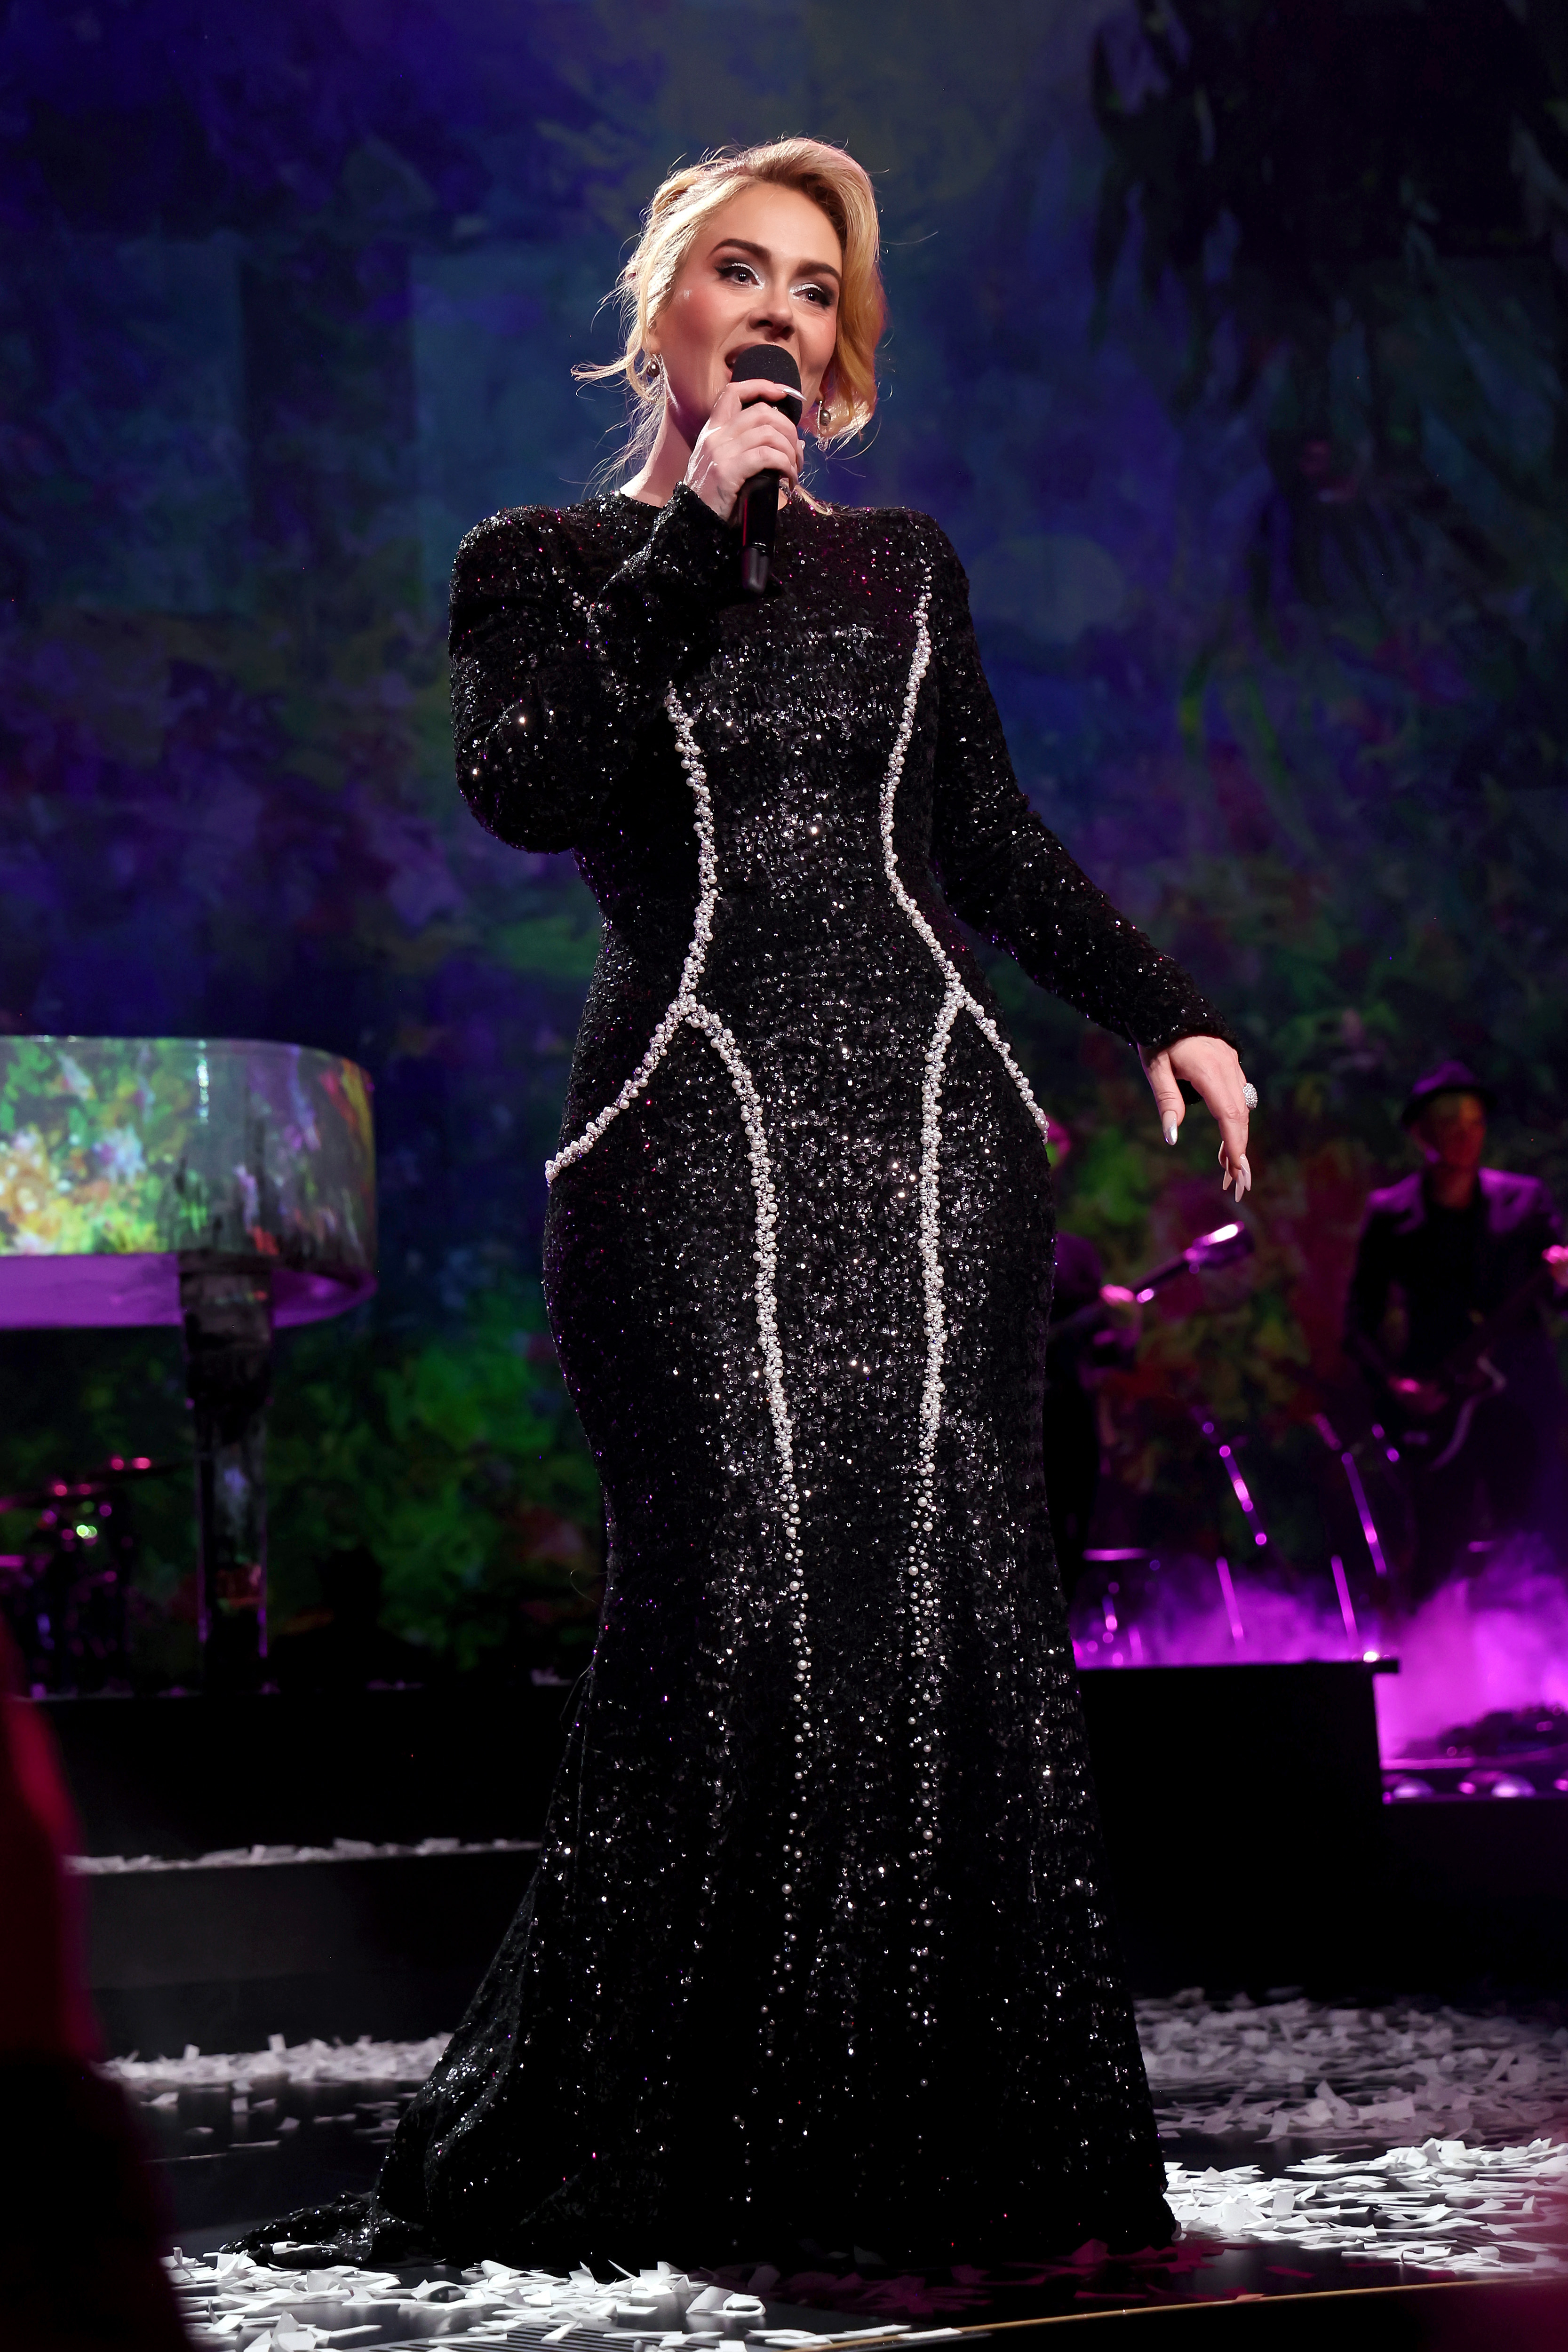 Adele performing on stage wearing a long-sleeved sequined gown